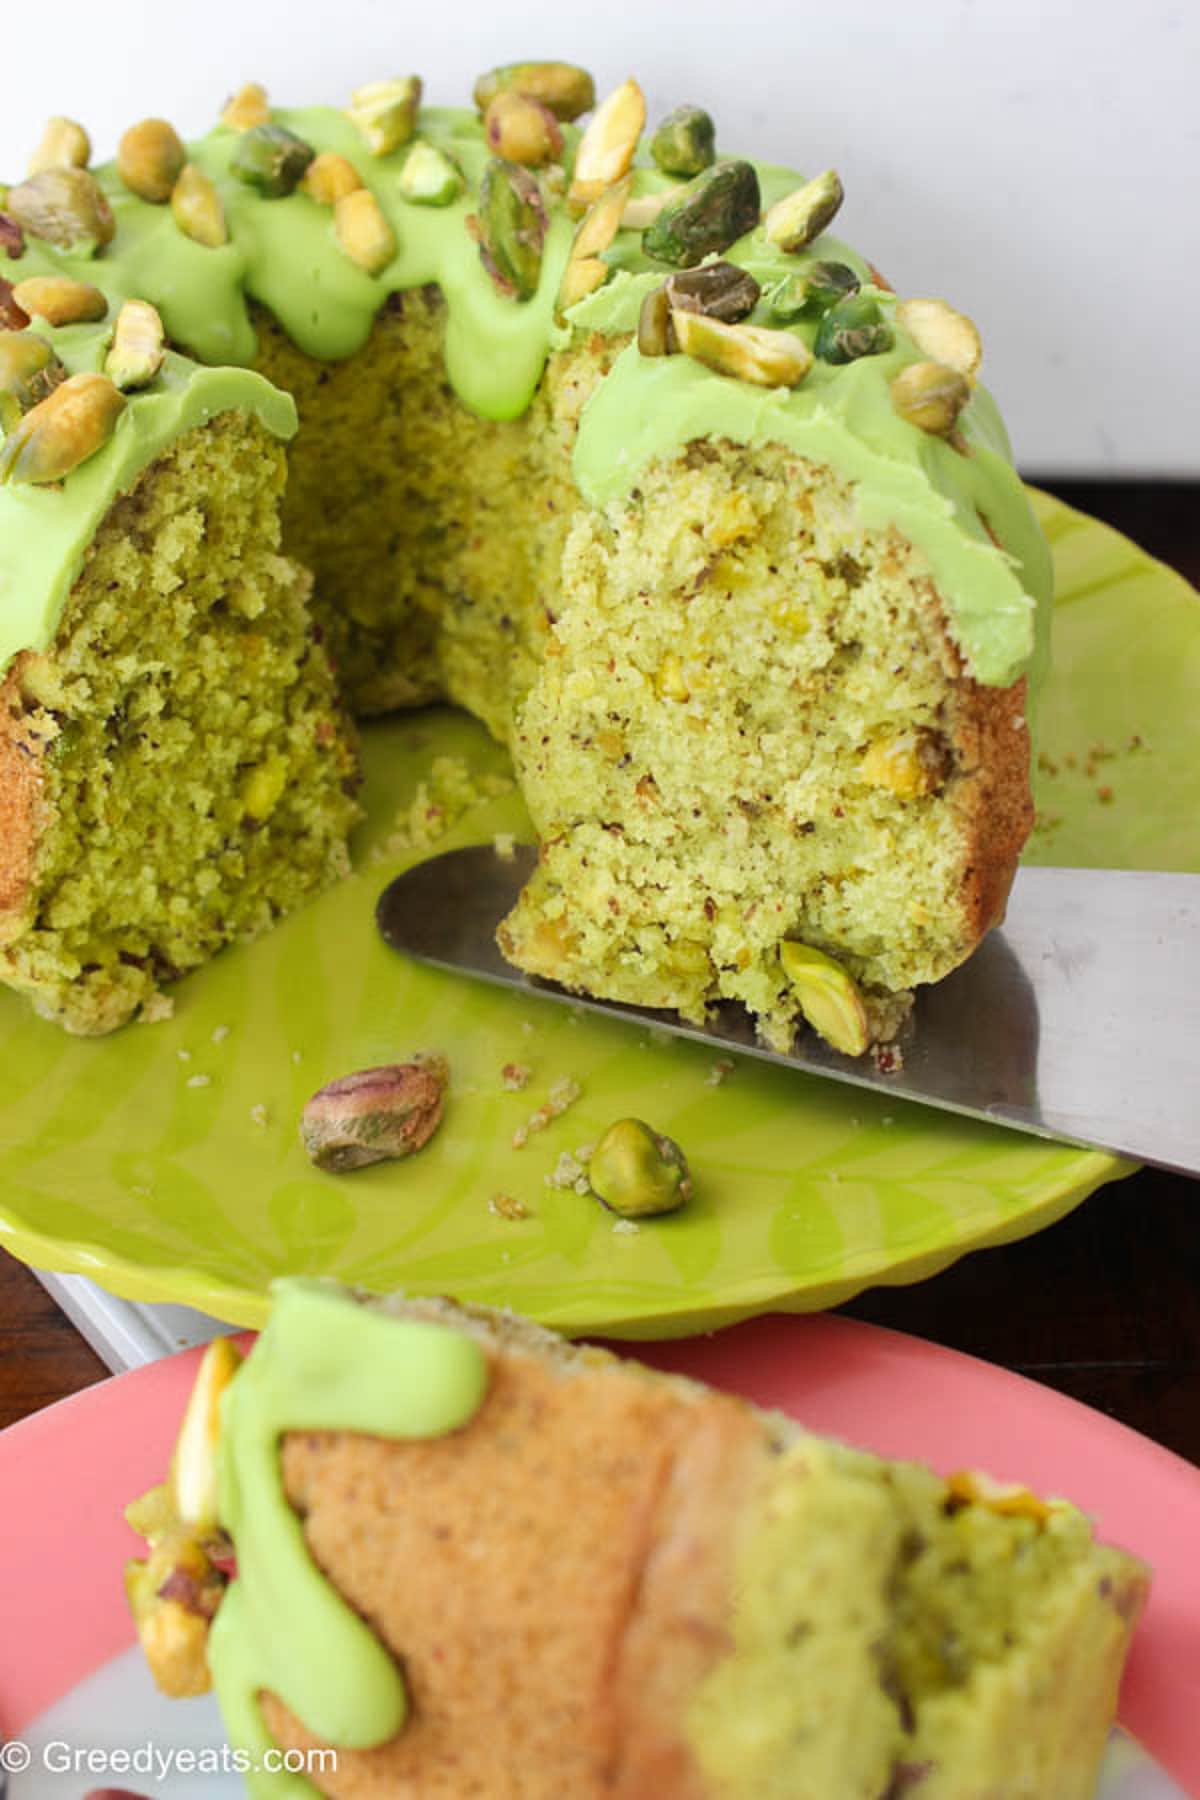 Buttery Pistachio Cake topped with melted chocolate topping and pistachio chunks.